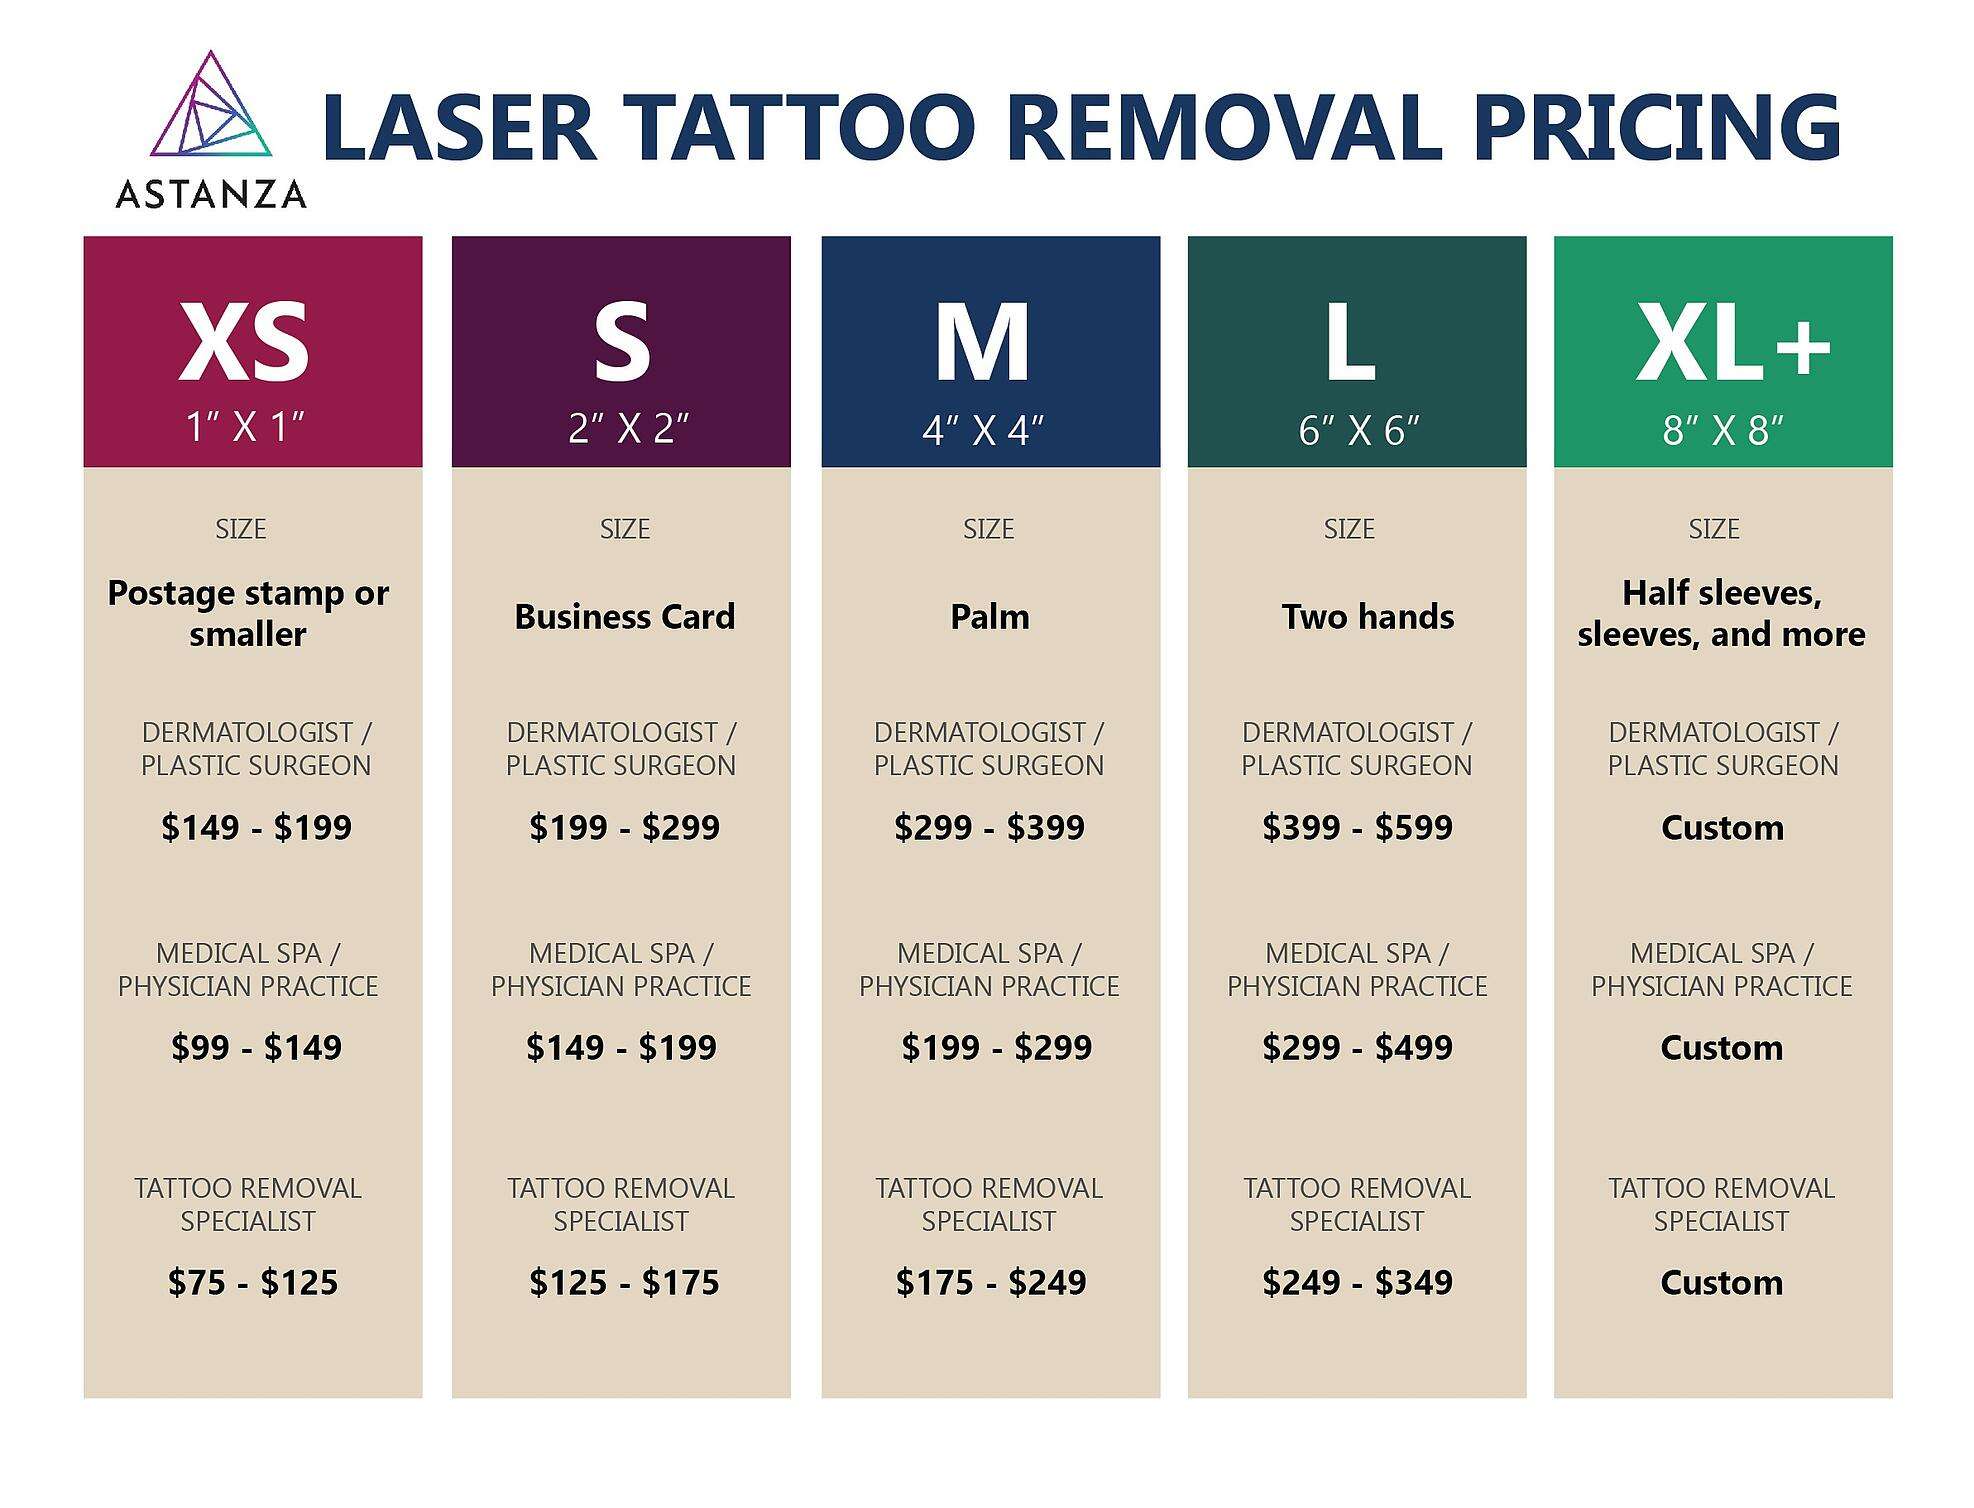 How to Price Laser Tattoo Removal Treatments